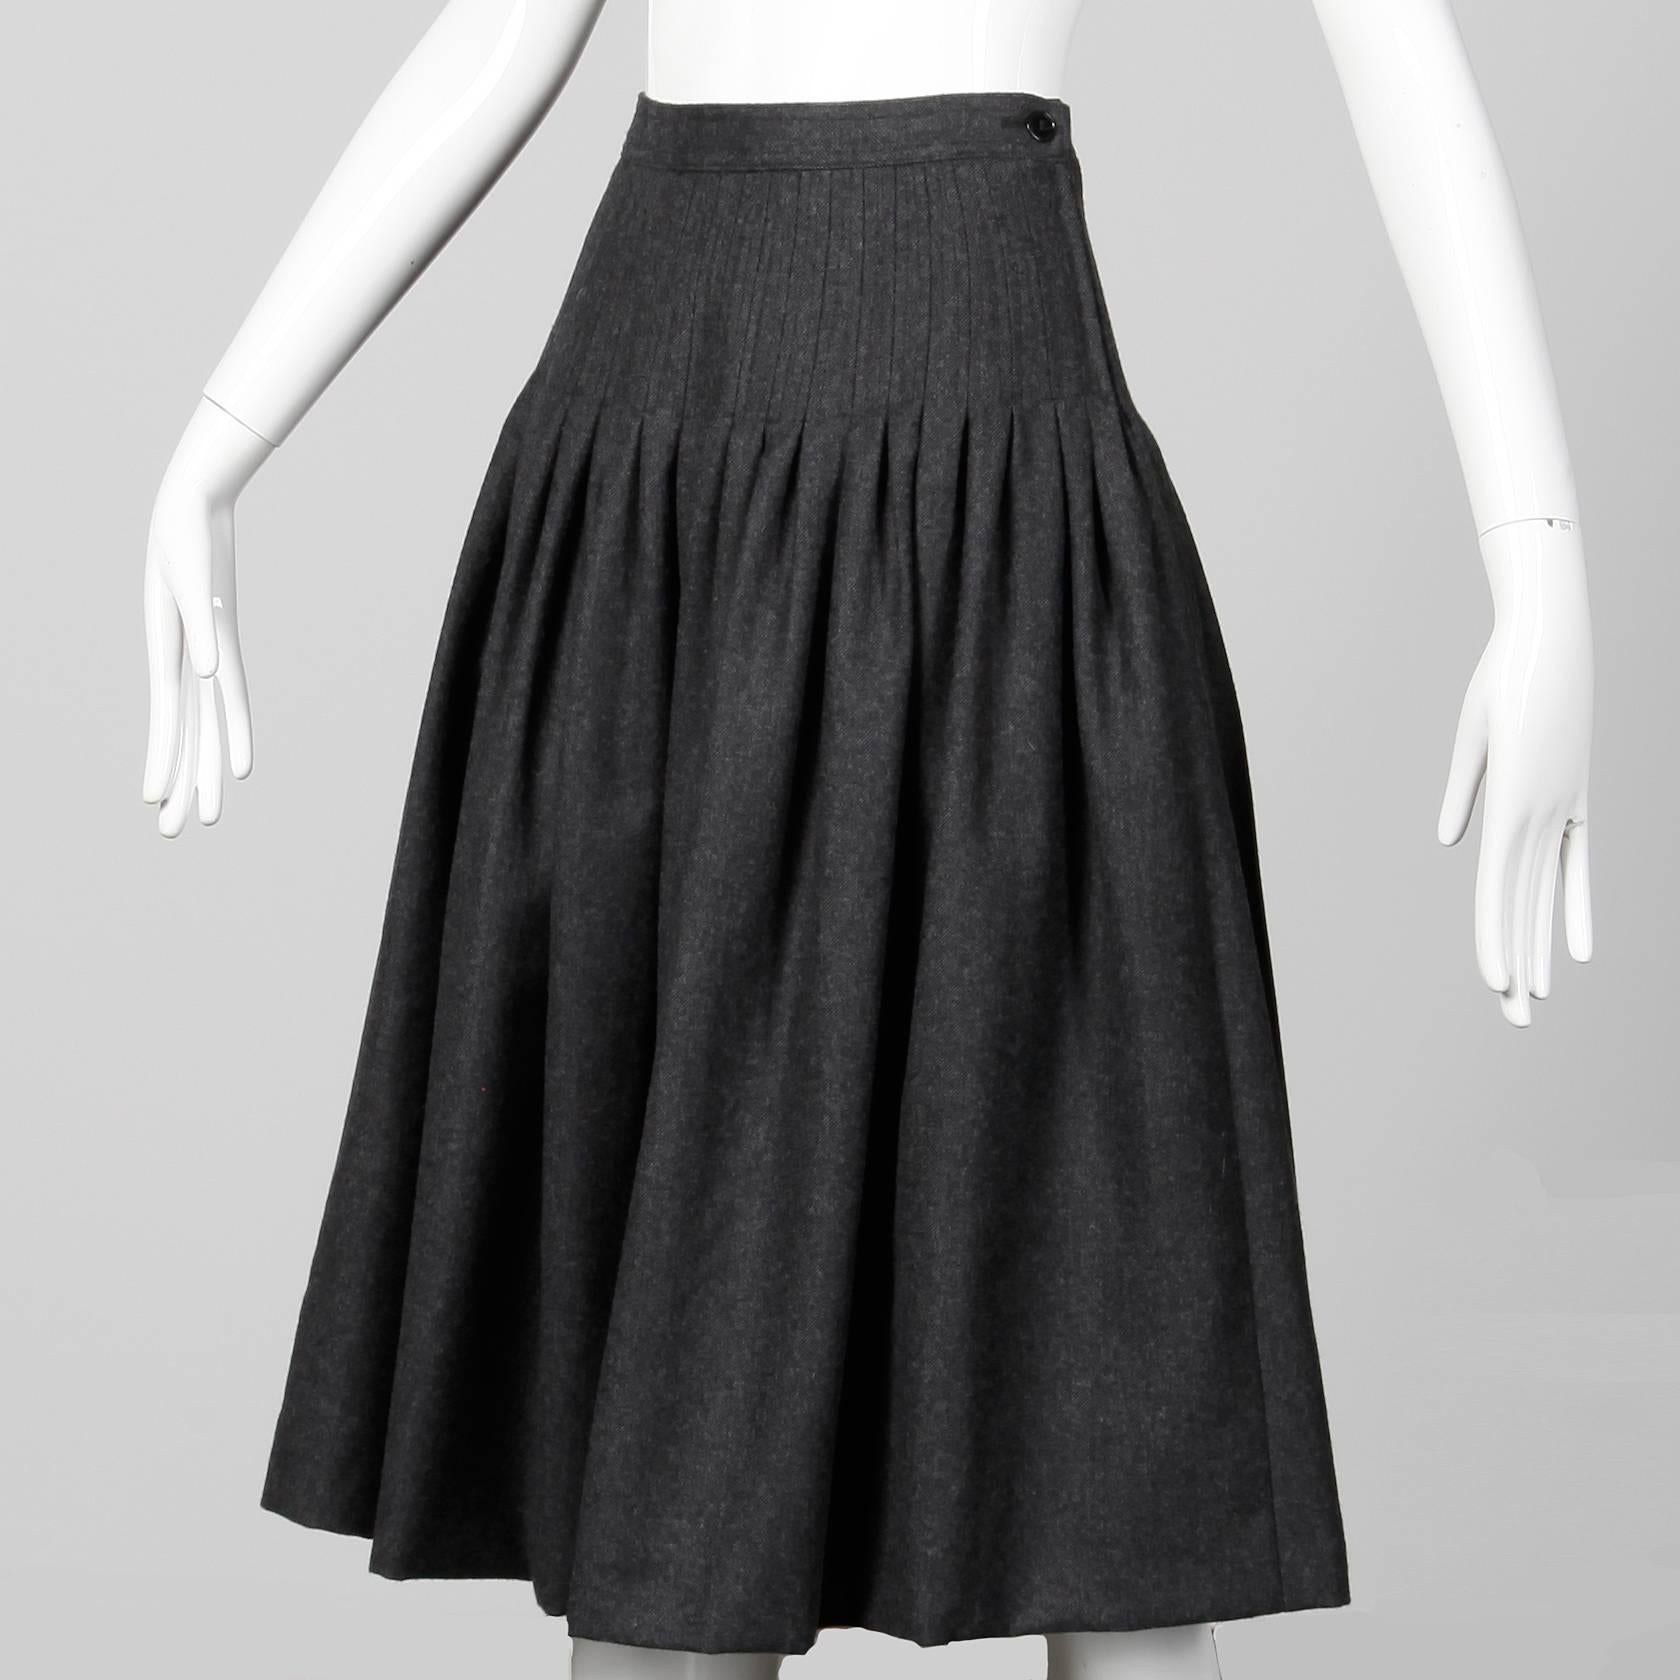 Vintage Valentino cashmere and wool blend gray fit and flare midi skirt. Unlined with side zip and button closure. The marked size is 44/ 10, but the skirt fits like a modern small-medium. The waist measures 27", hips up to 38" and the